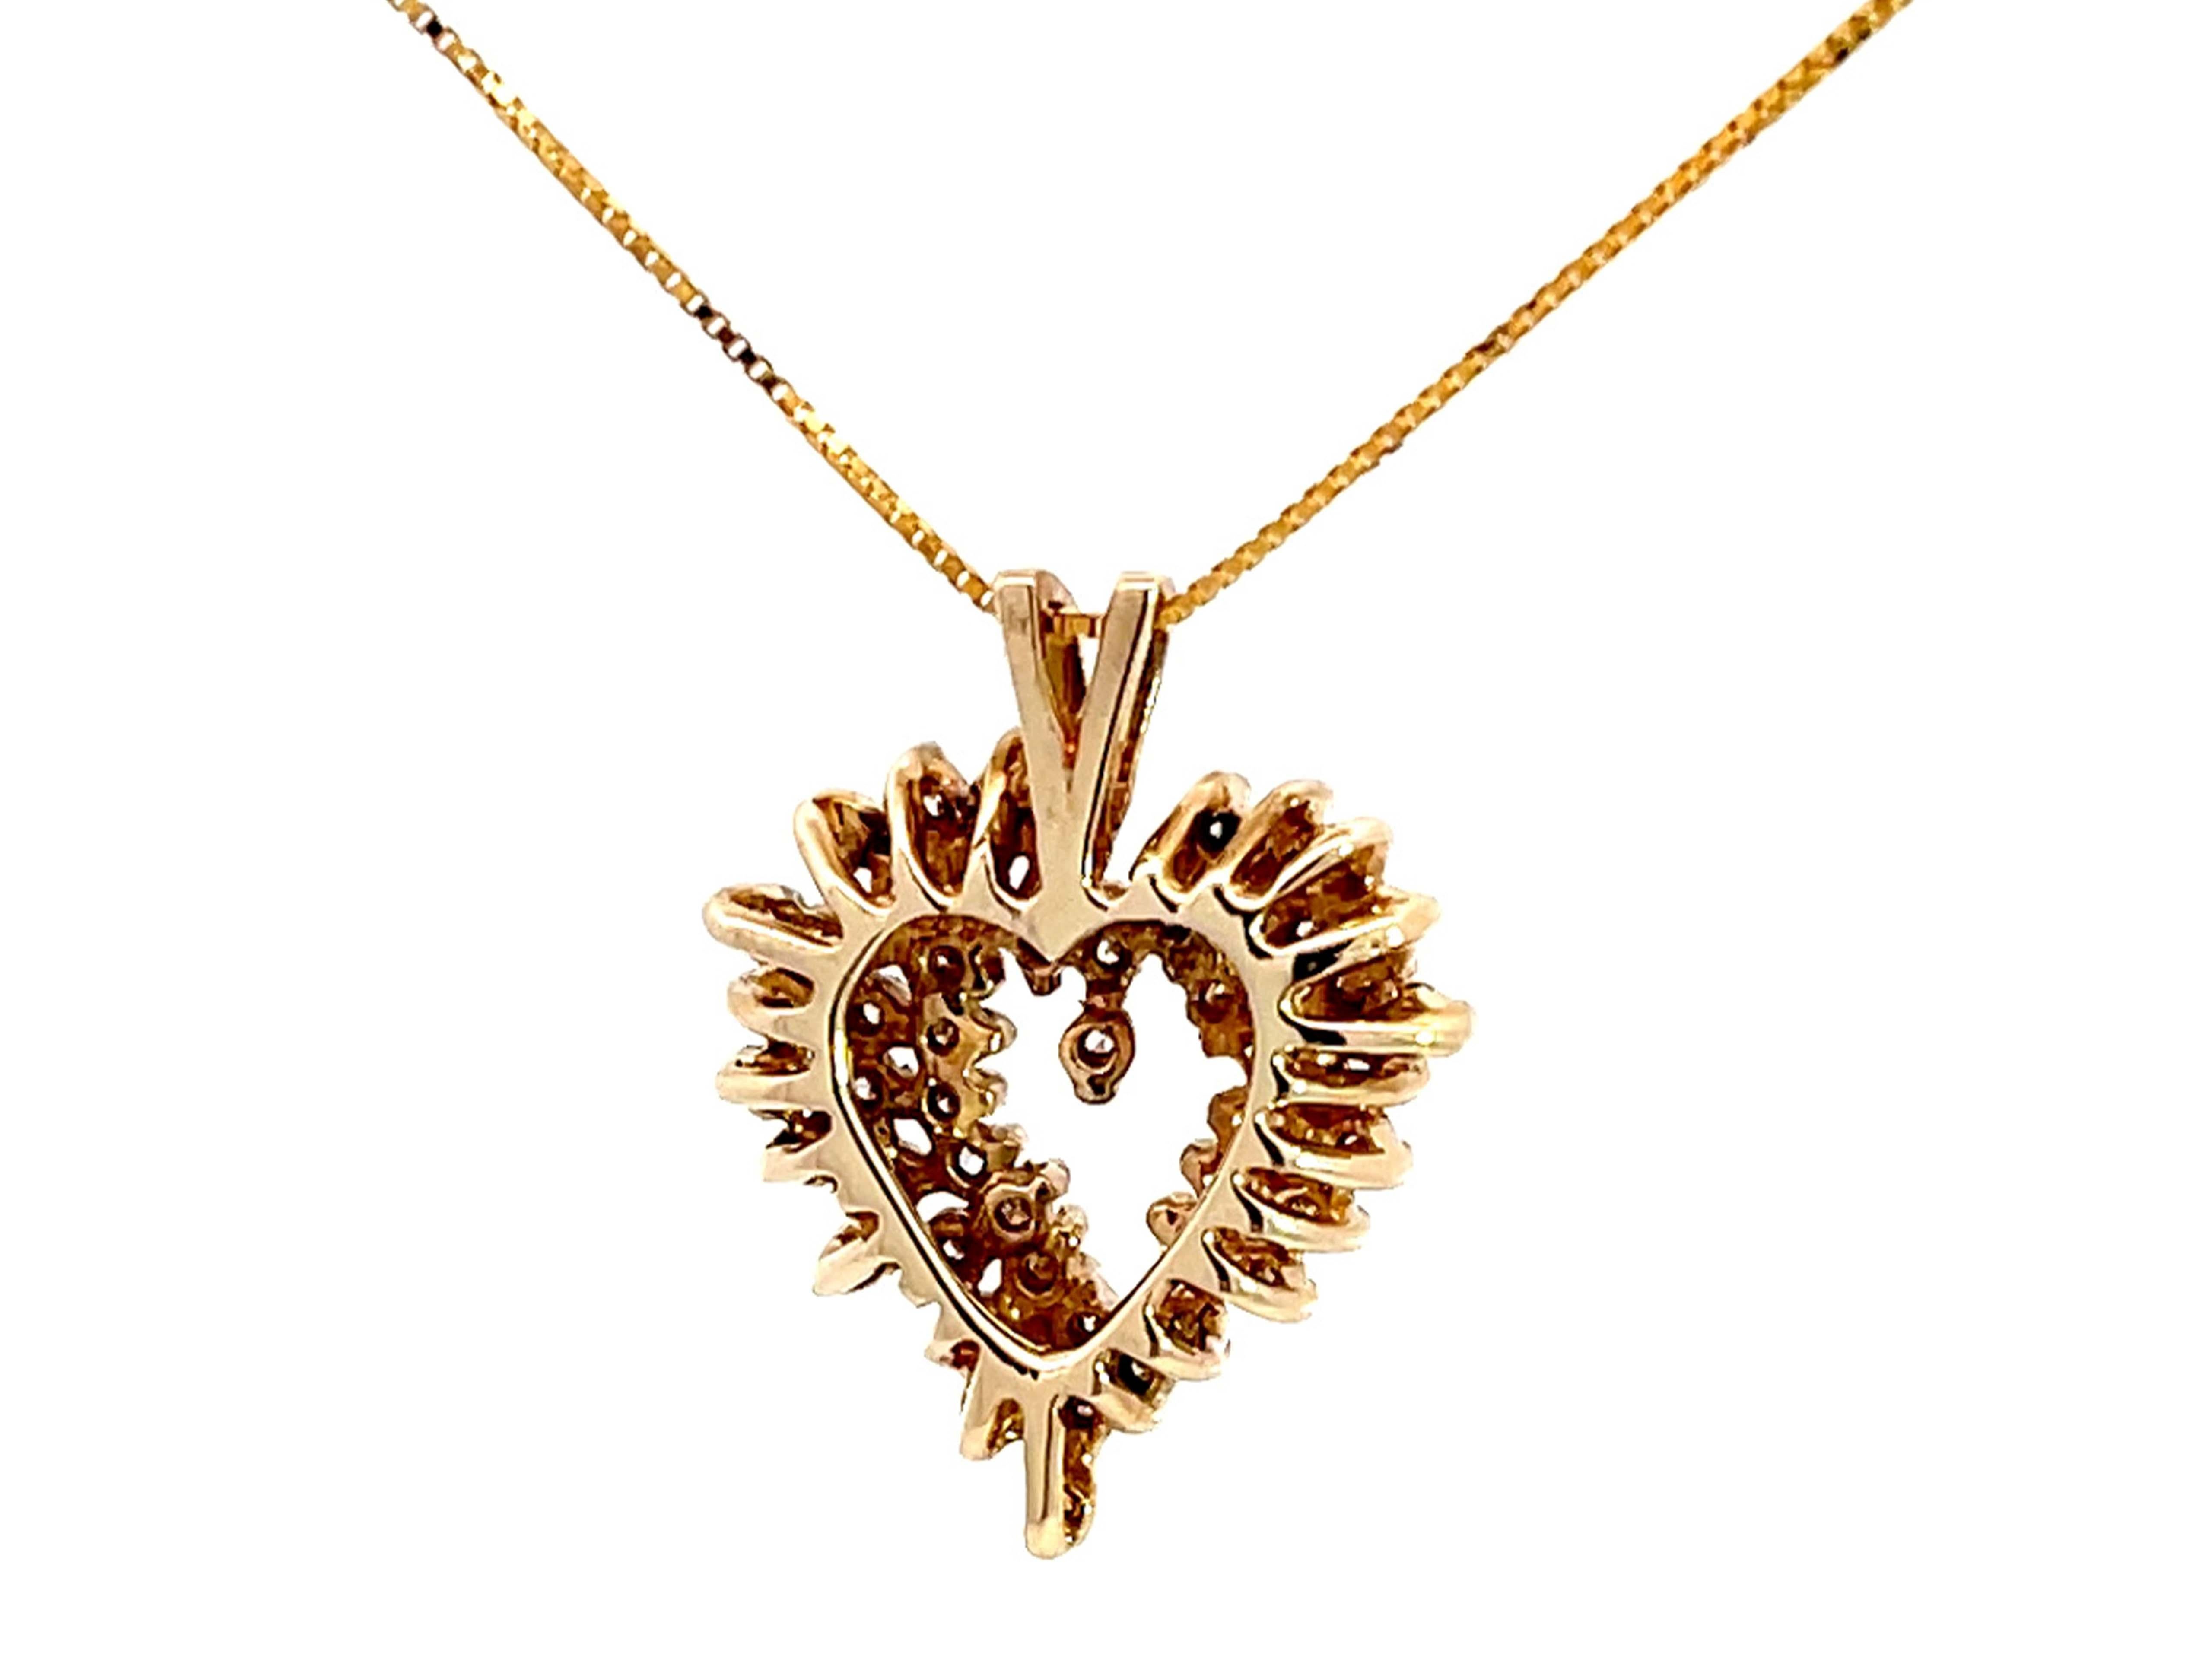 Diamond Heart Pendant with Chain in 14k Yellow Gold In Excellent Condition For Sale In Honolulu, HI